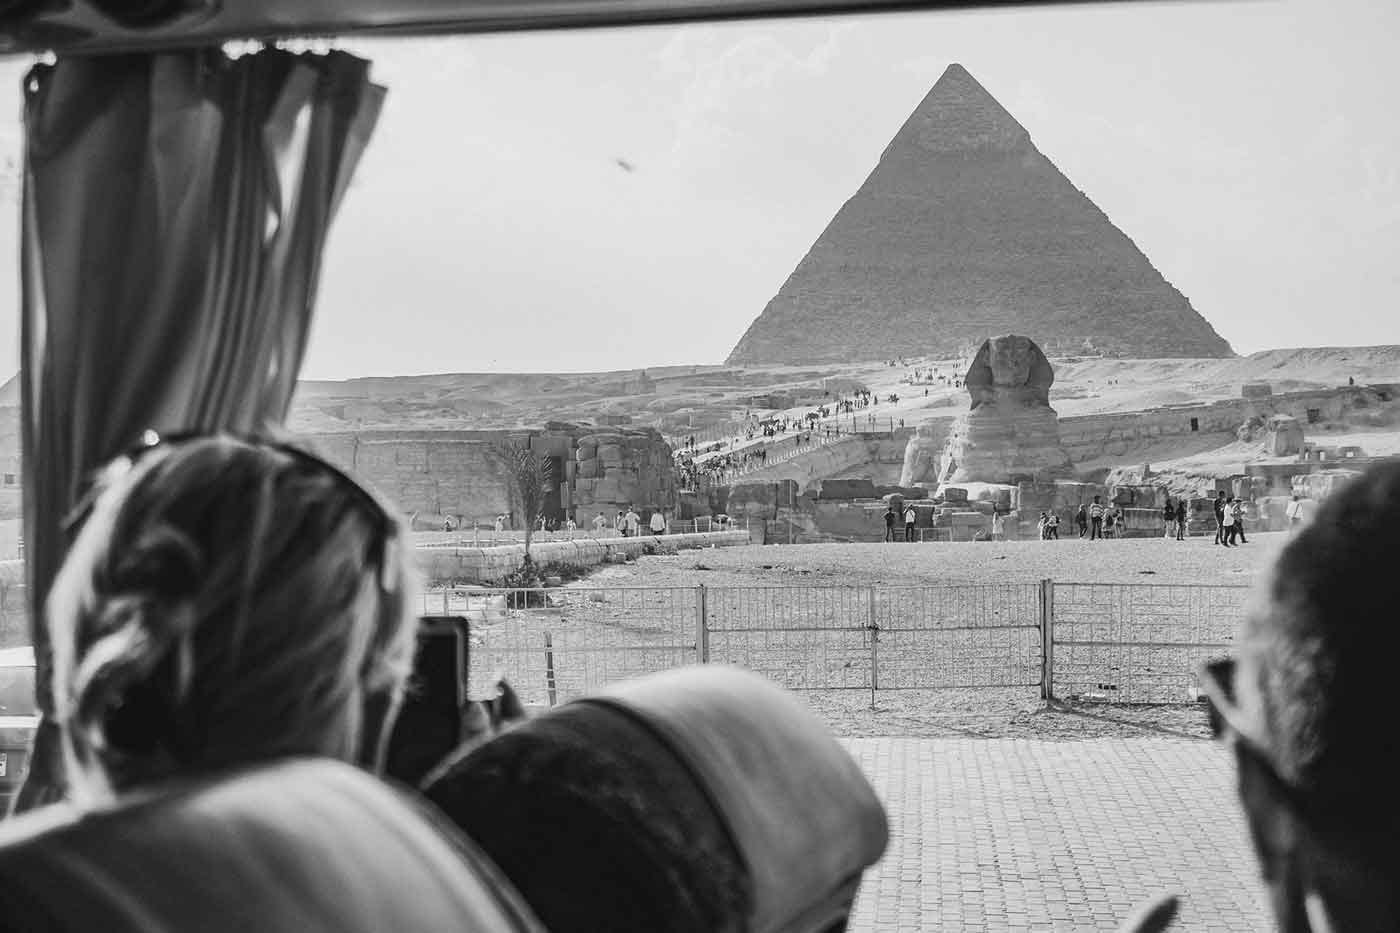 Tourists in bus looking at pyramids 